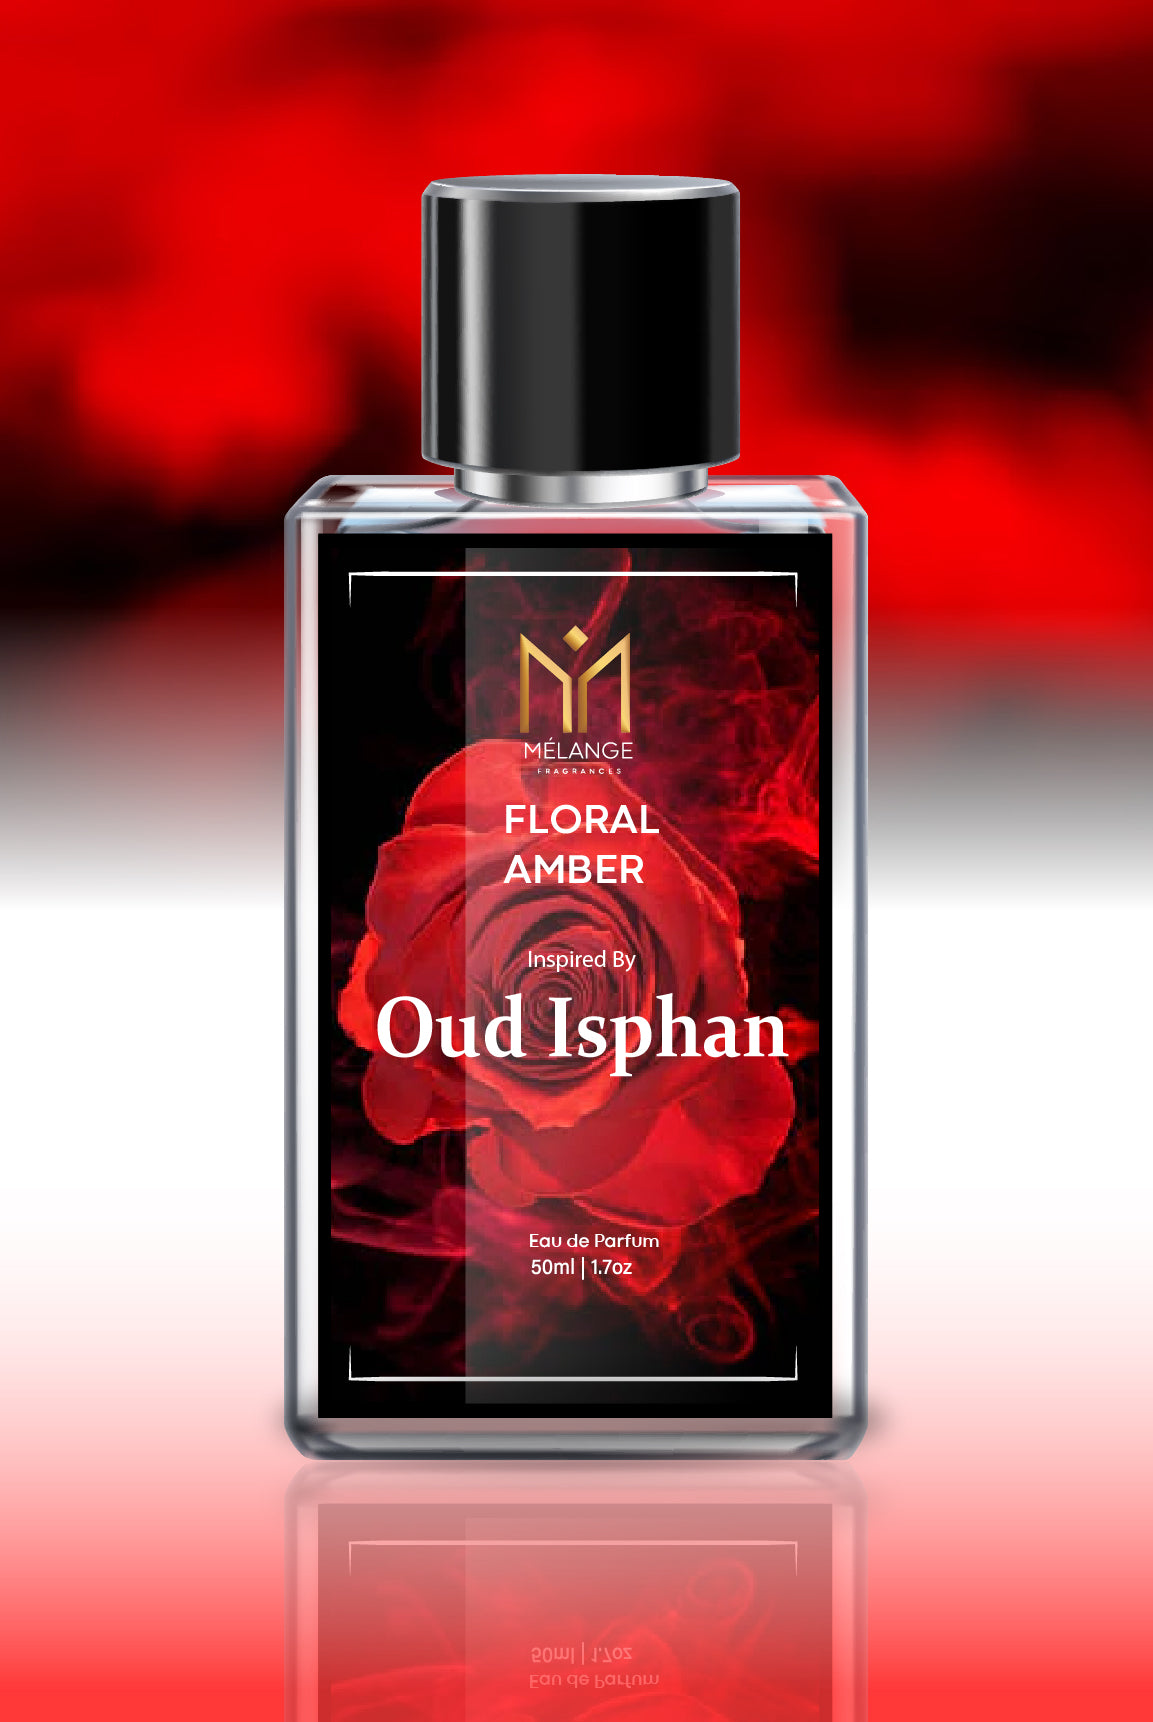 FLORAL AMBER - Inspired By Oud Isphan